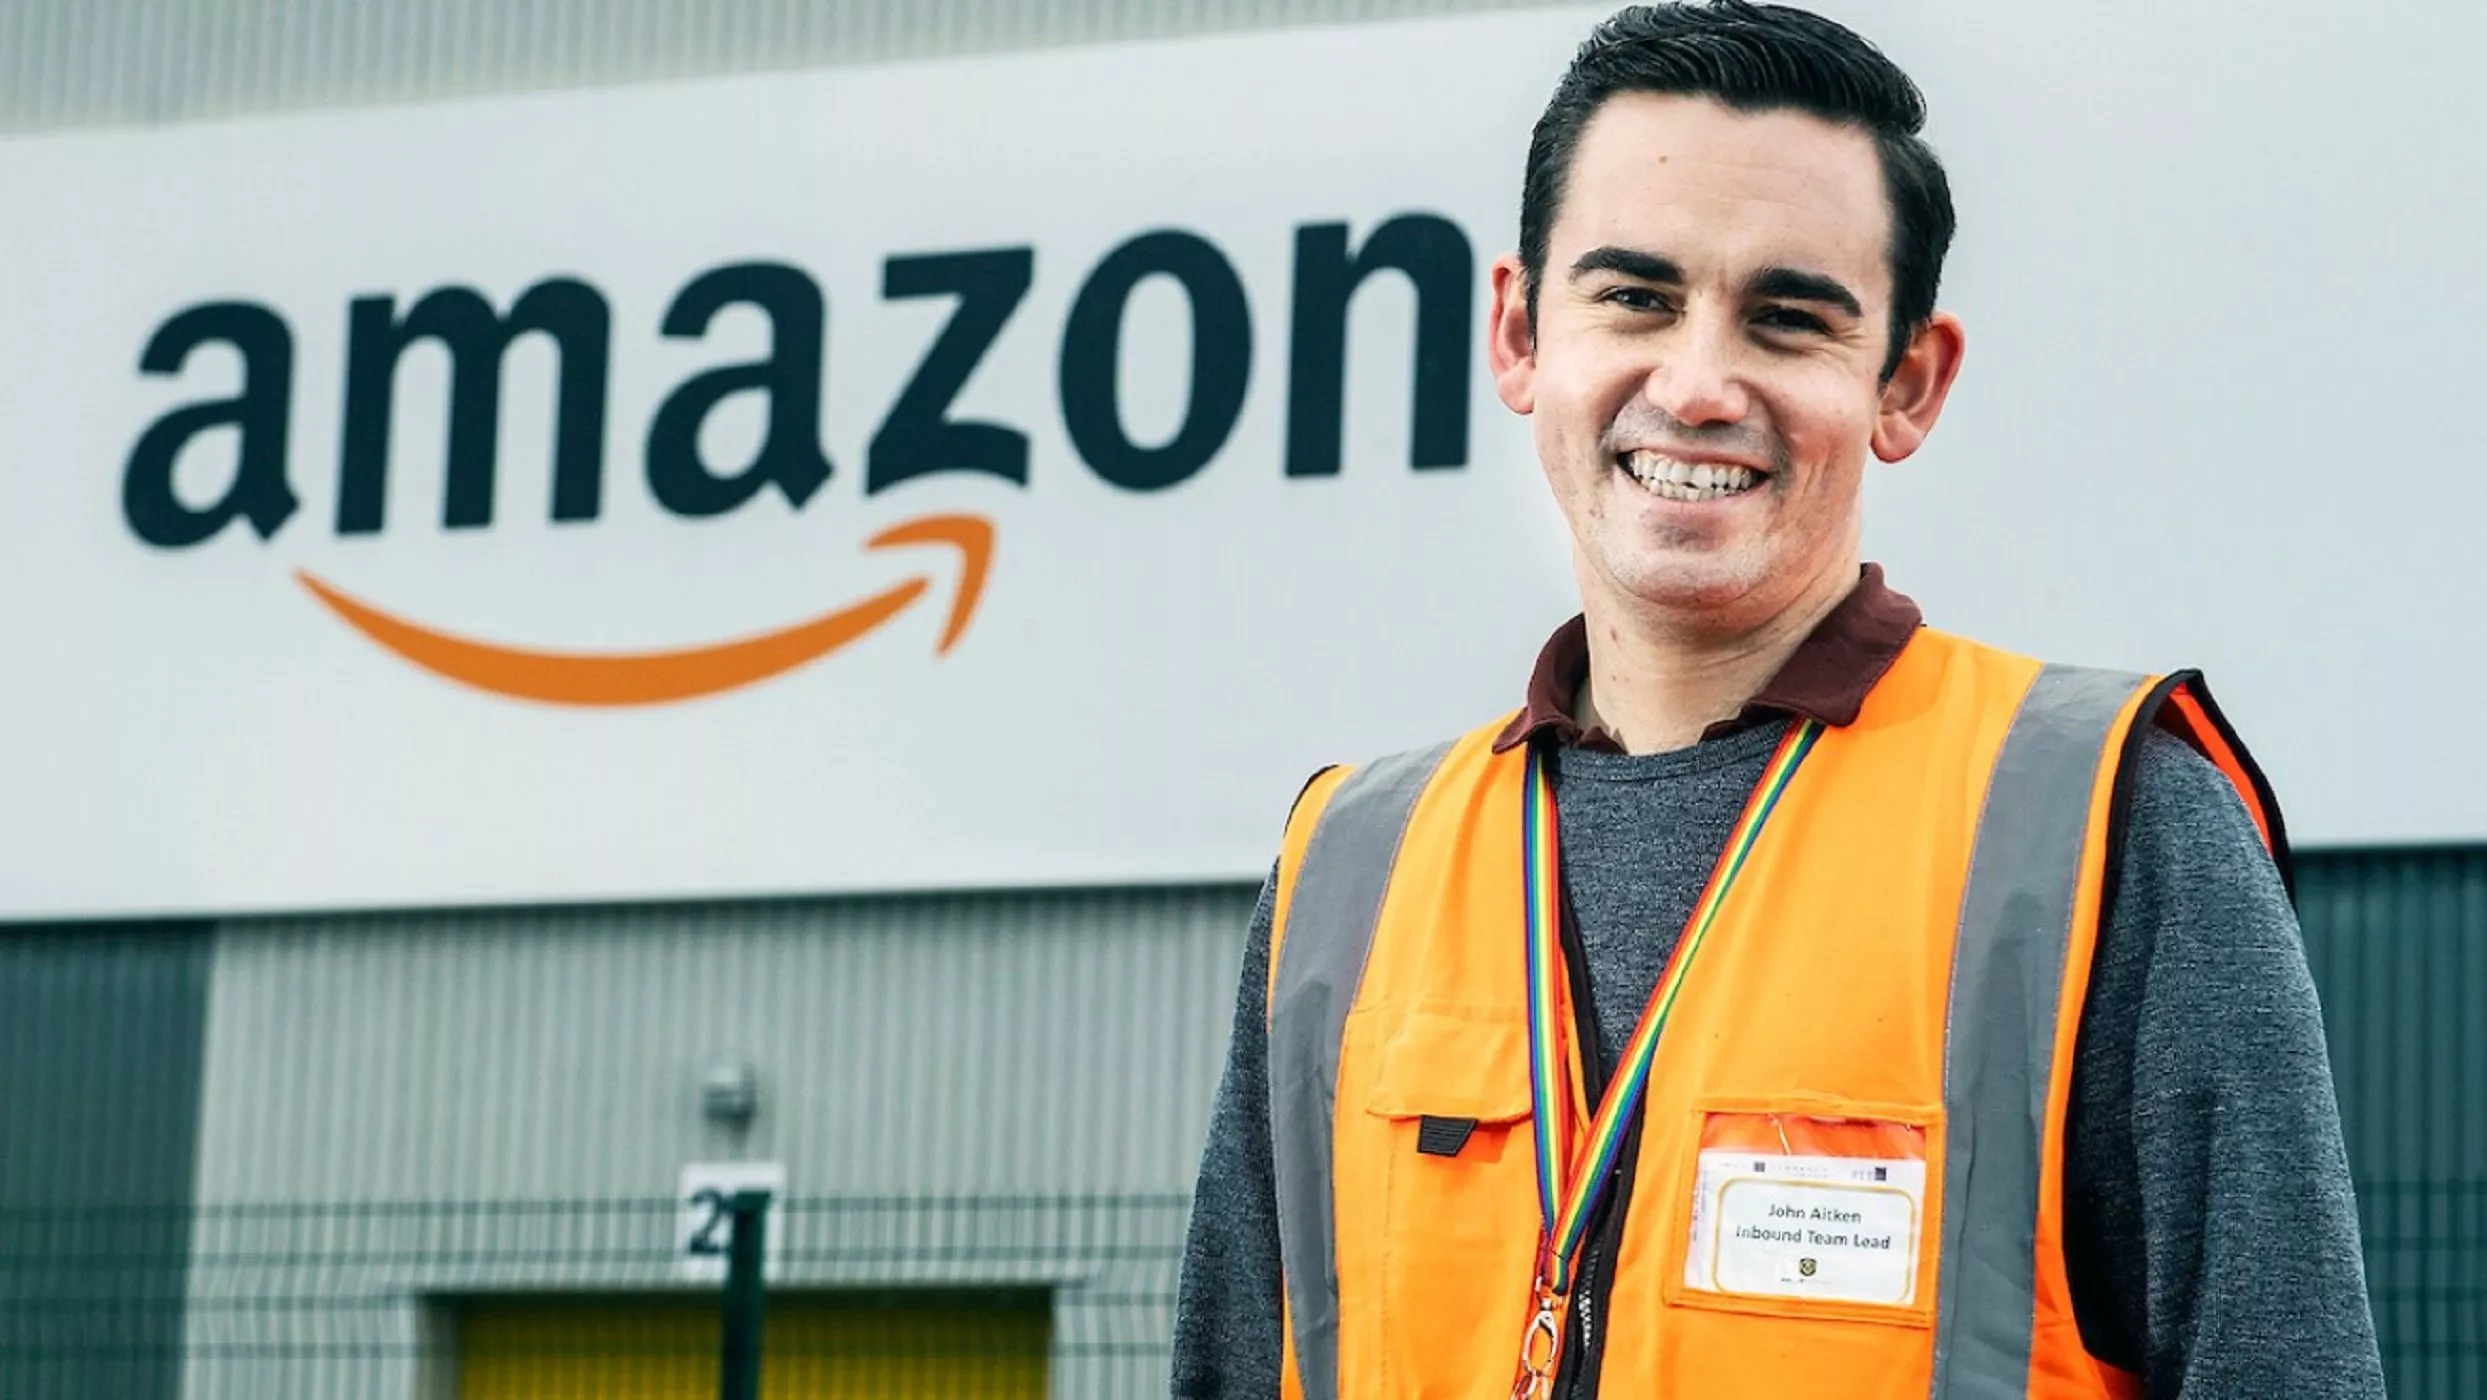 Exciting Opportunity for Graduates & MBA: AMAZON is Hiring